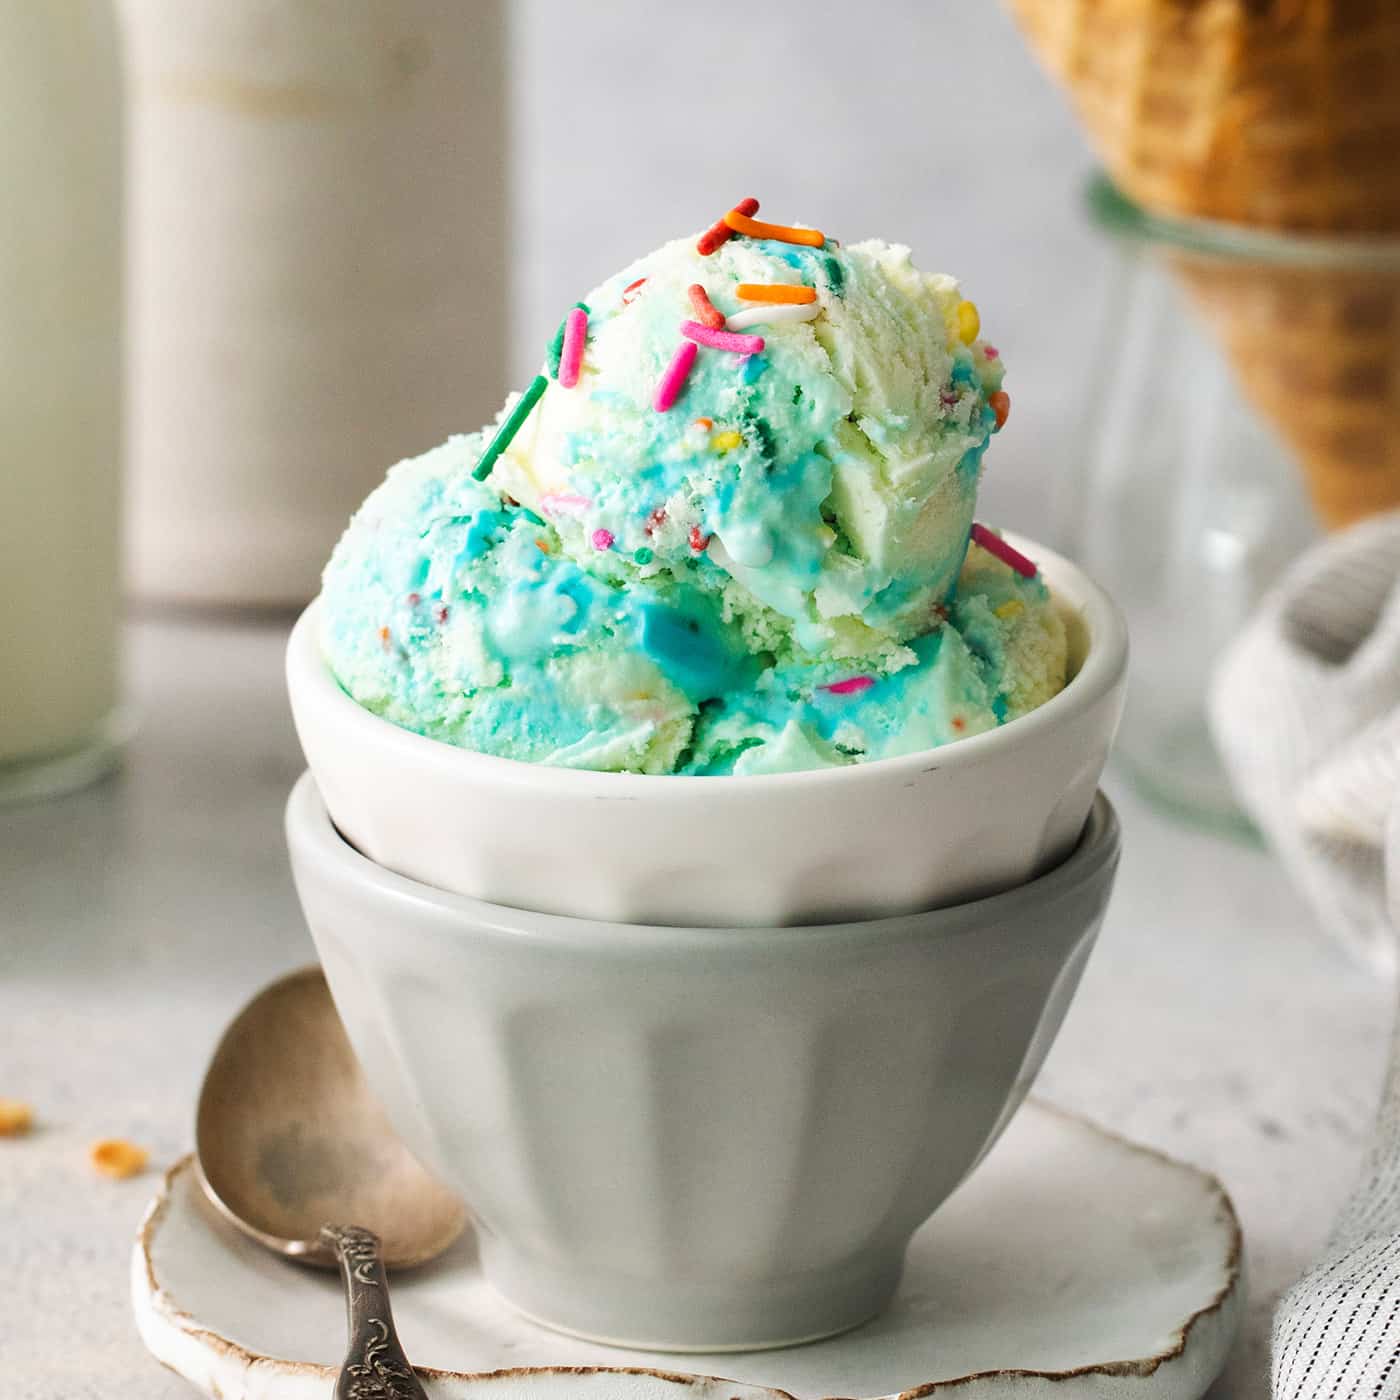 A bowl of blue birthday cake ice cream with a cone of ice cream next to it.